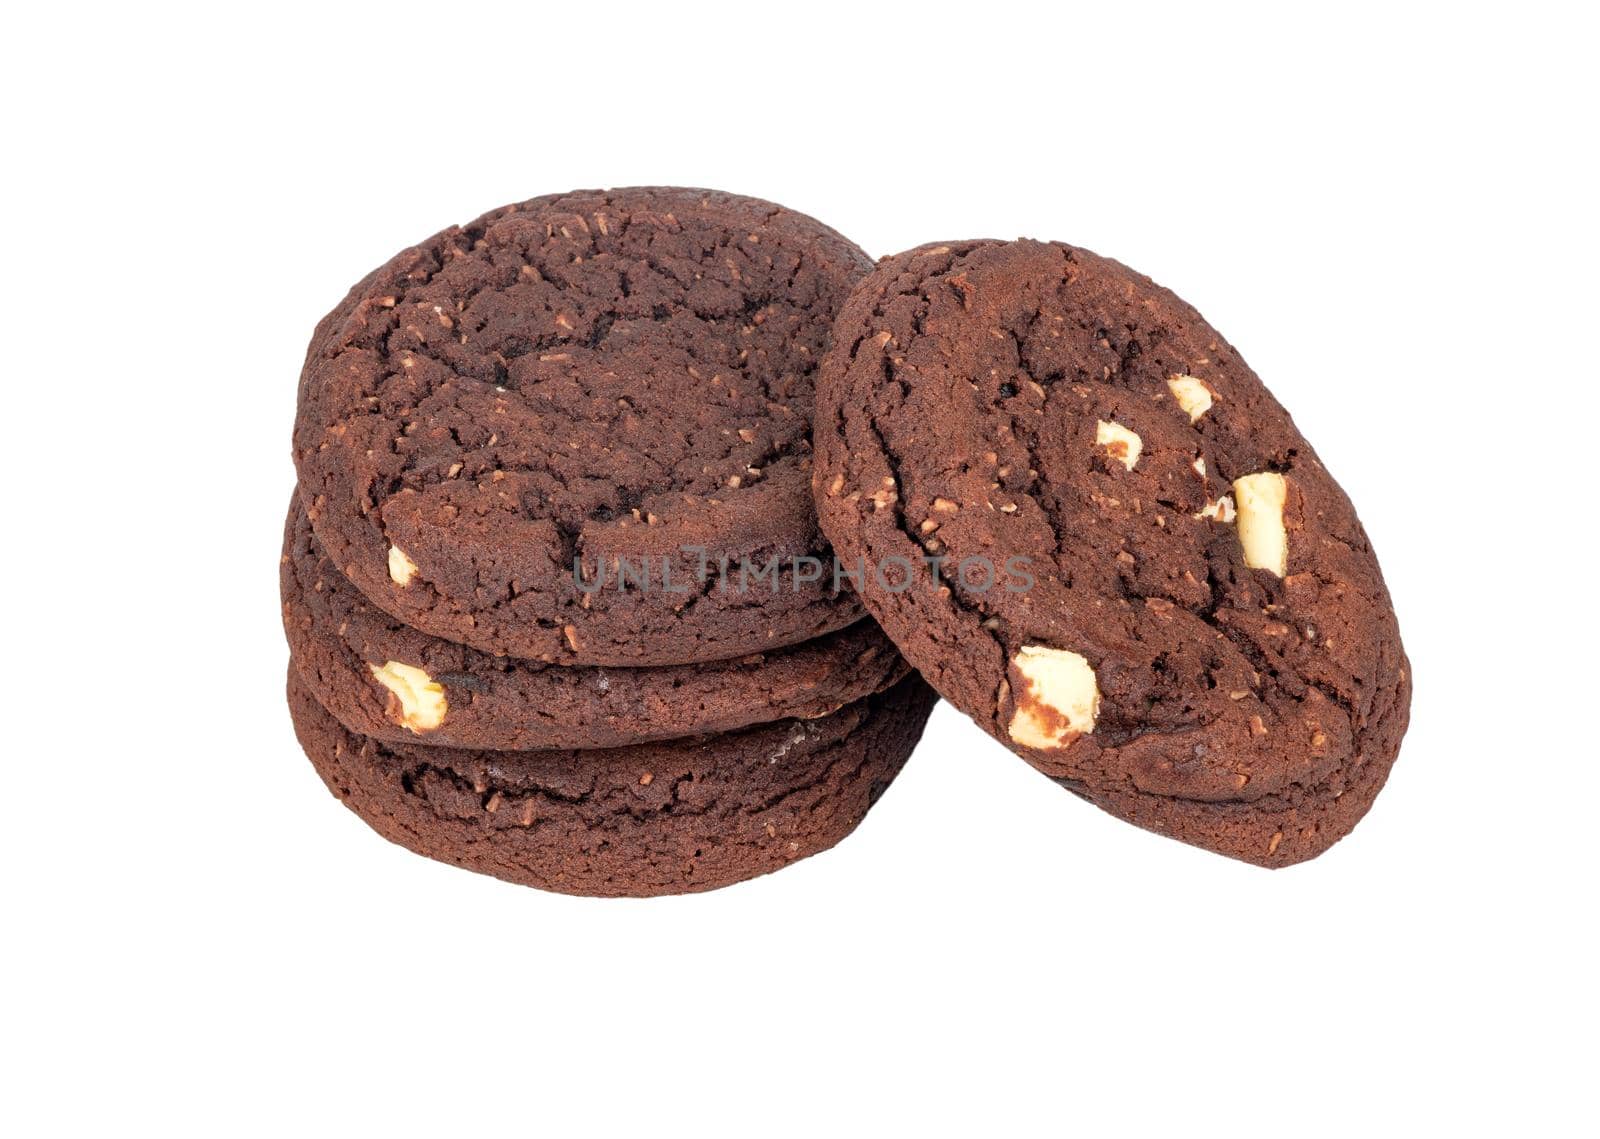 Stack of chocolate cookies with coconut slices on a white background